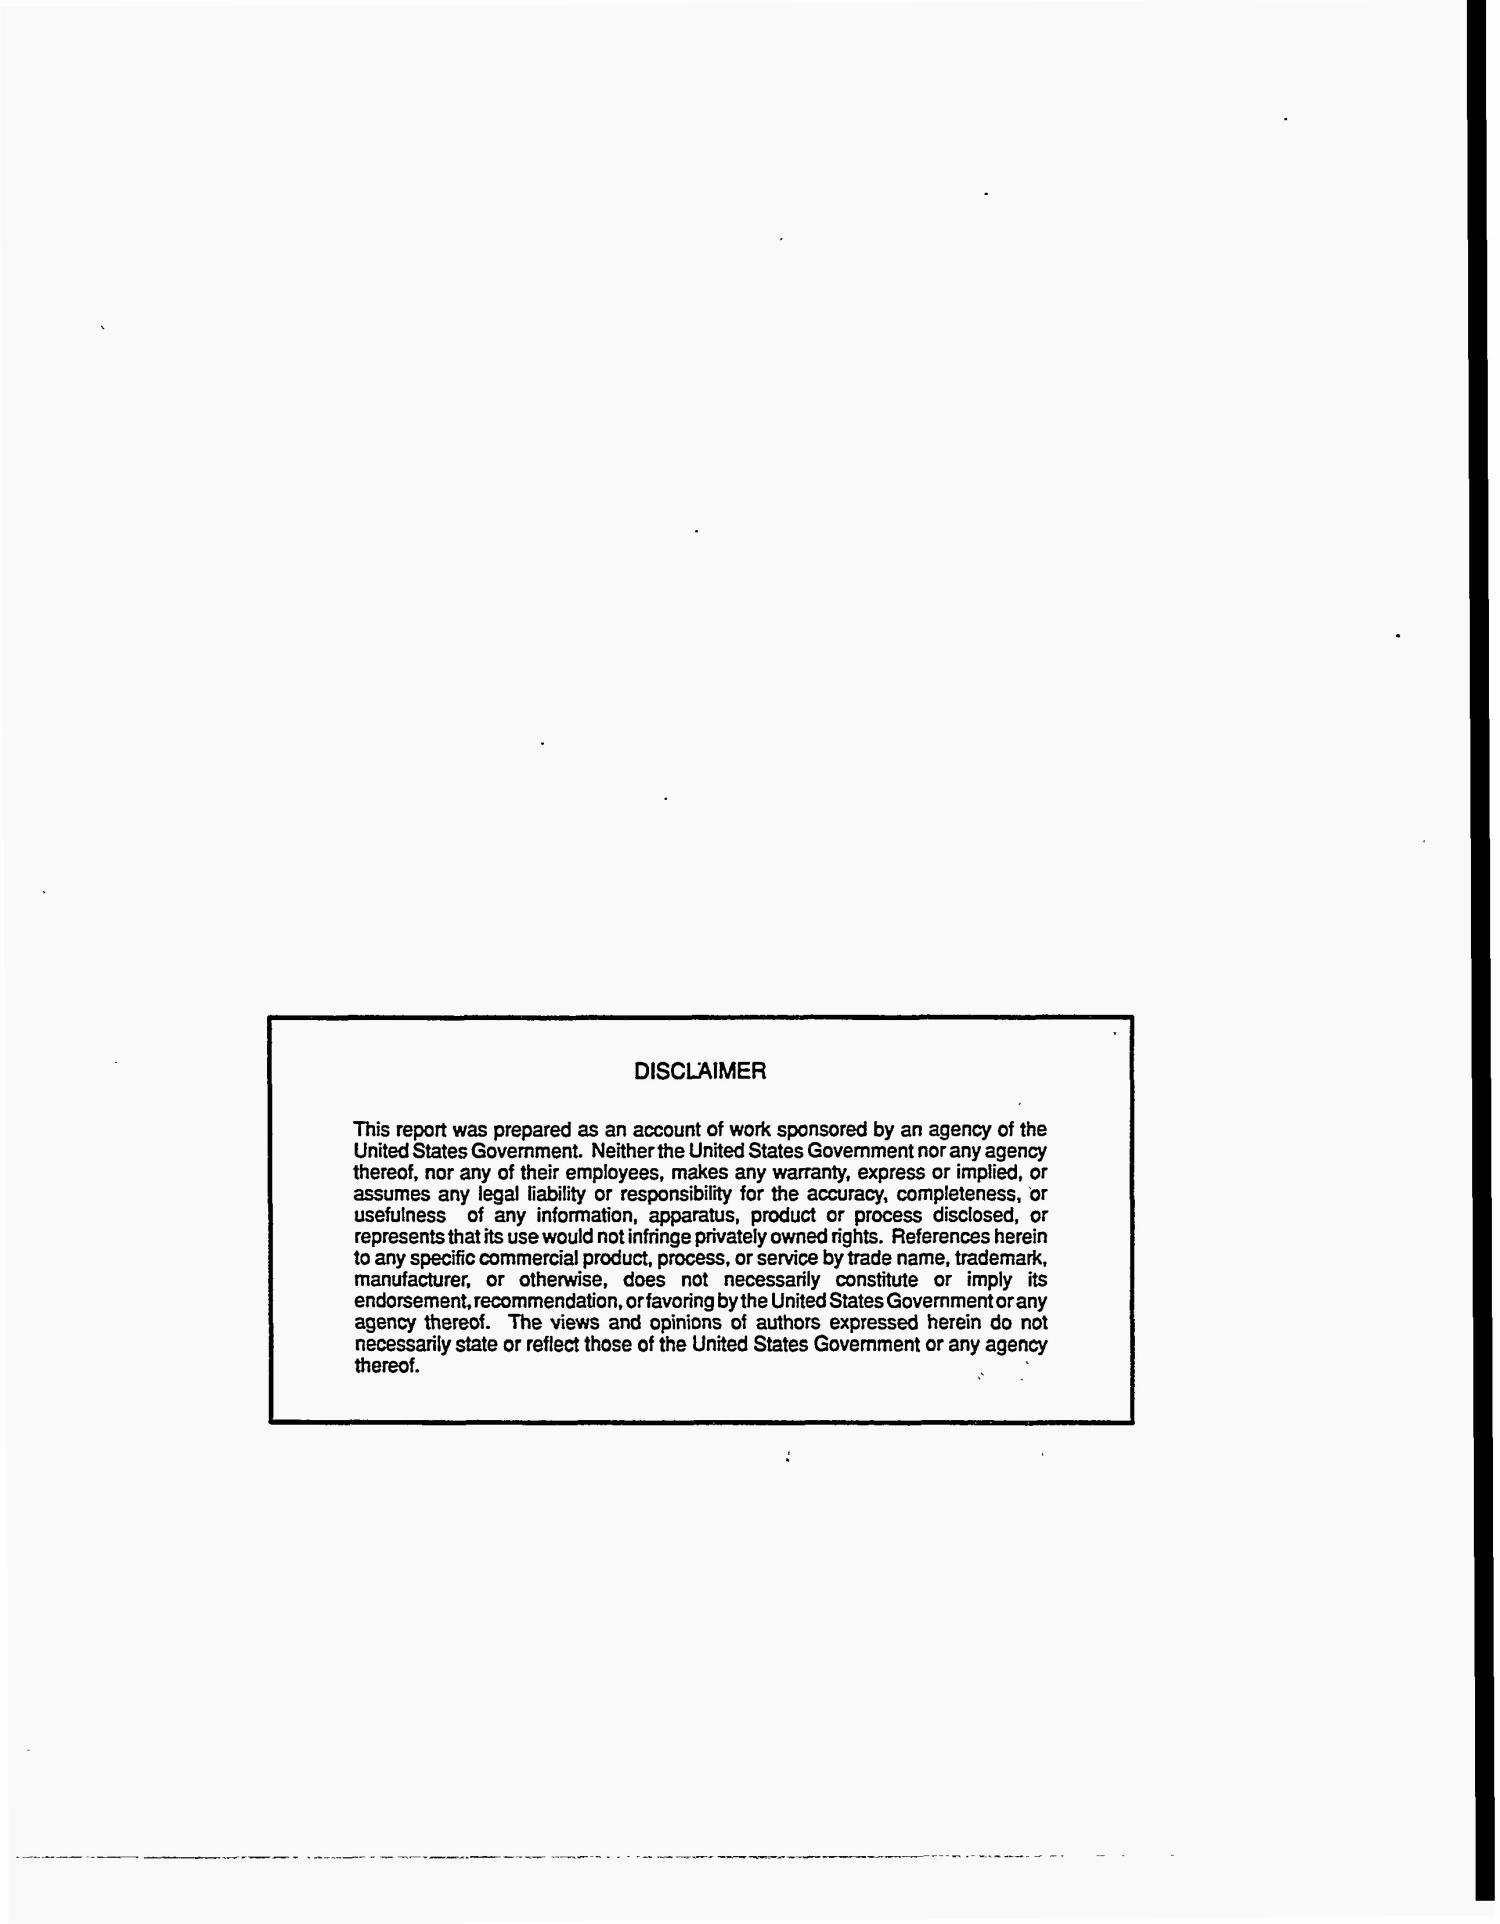 USABC electric vehicle Battery Test Procedures Manual. Revision 2
                                                
                                                    [Sequence #]: 2 of 158
                                                